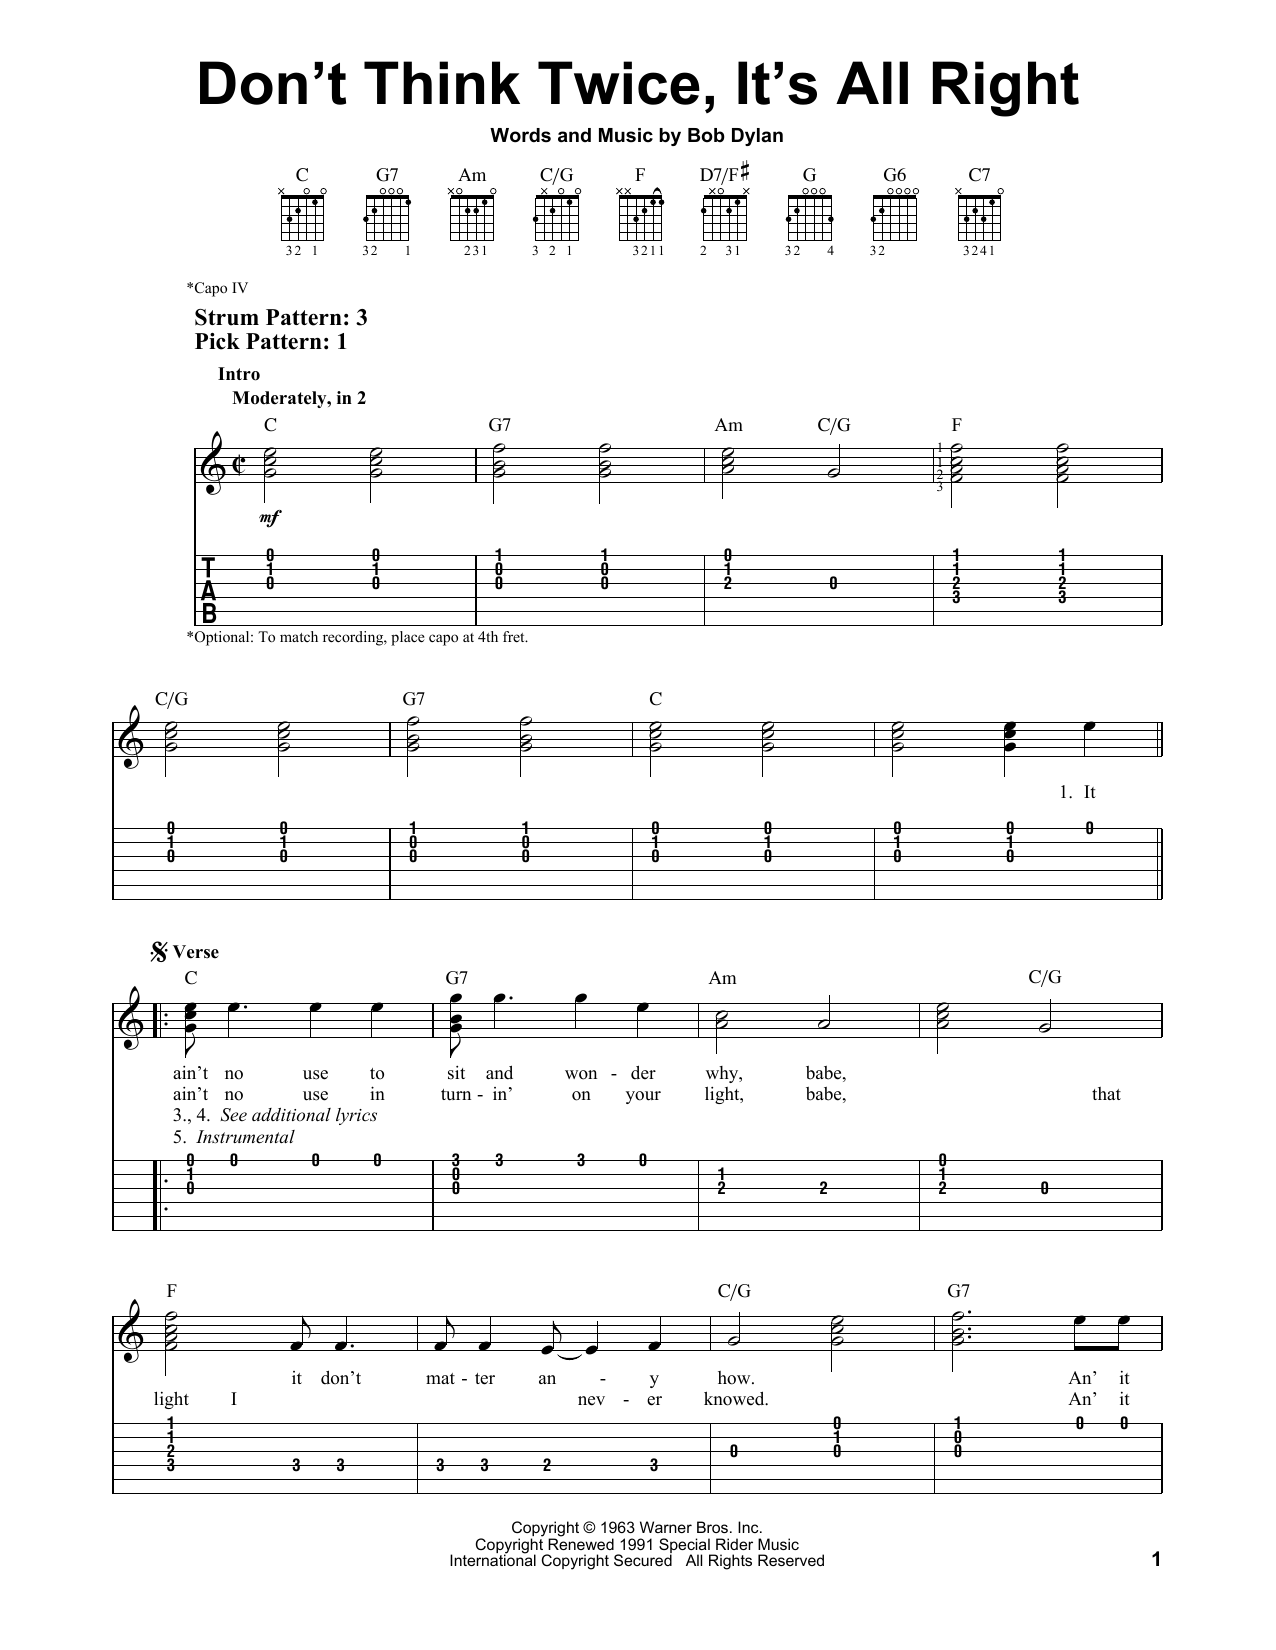 Download Bob Dylan Don't Think Twice, It's All Right Sheet Music